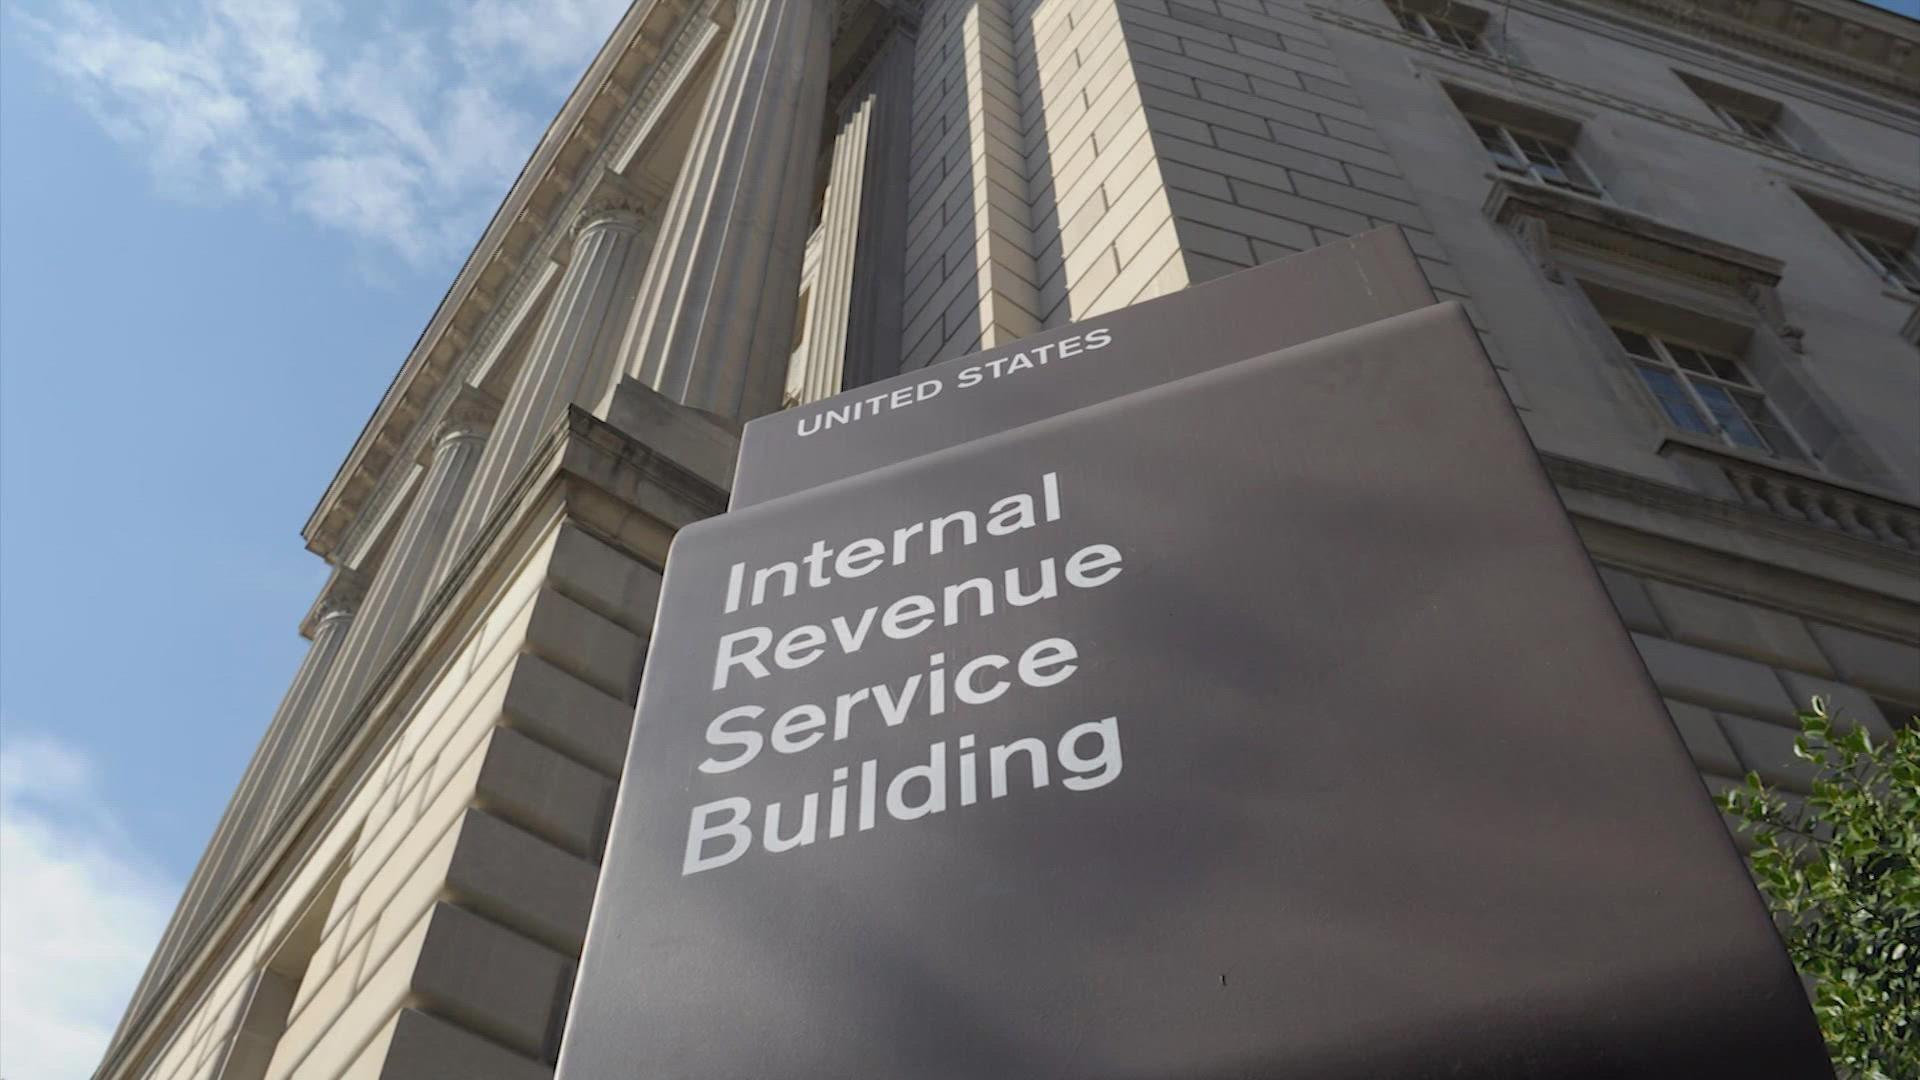 The IRS is still trying to process 2020 tax returns as it deals with a major backlog.